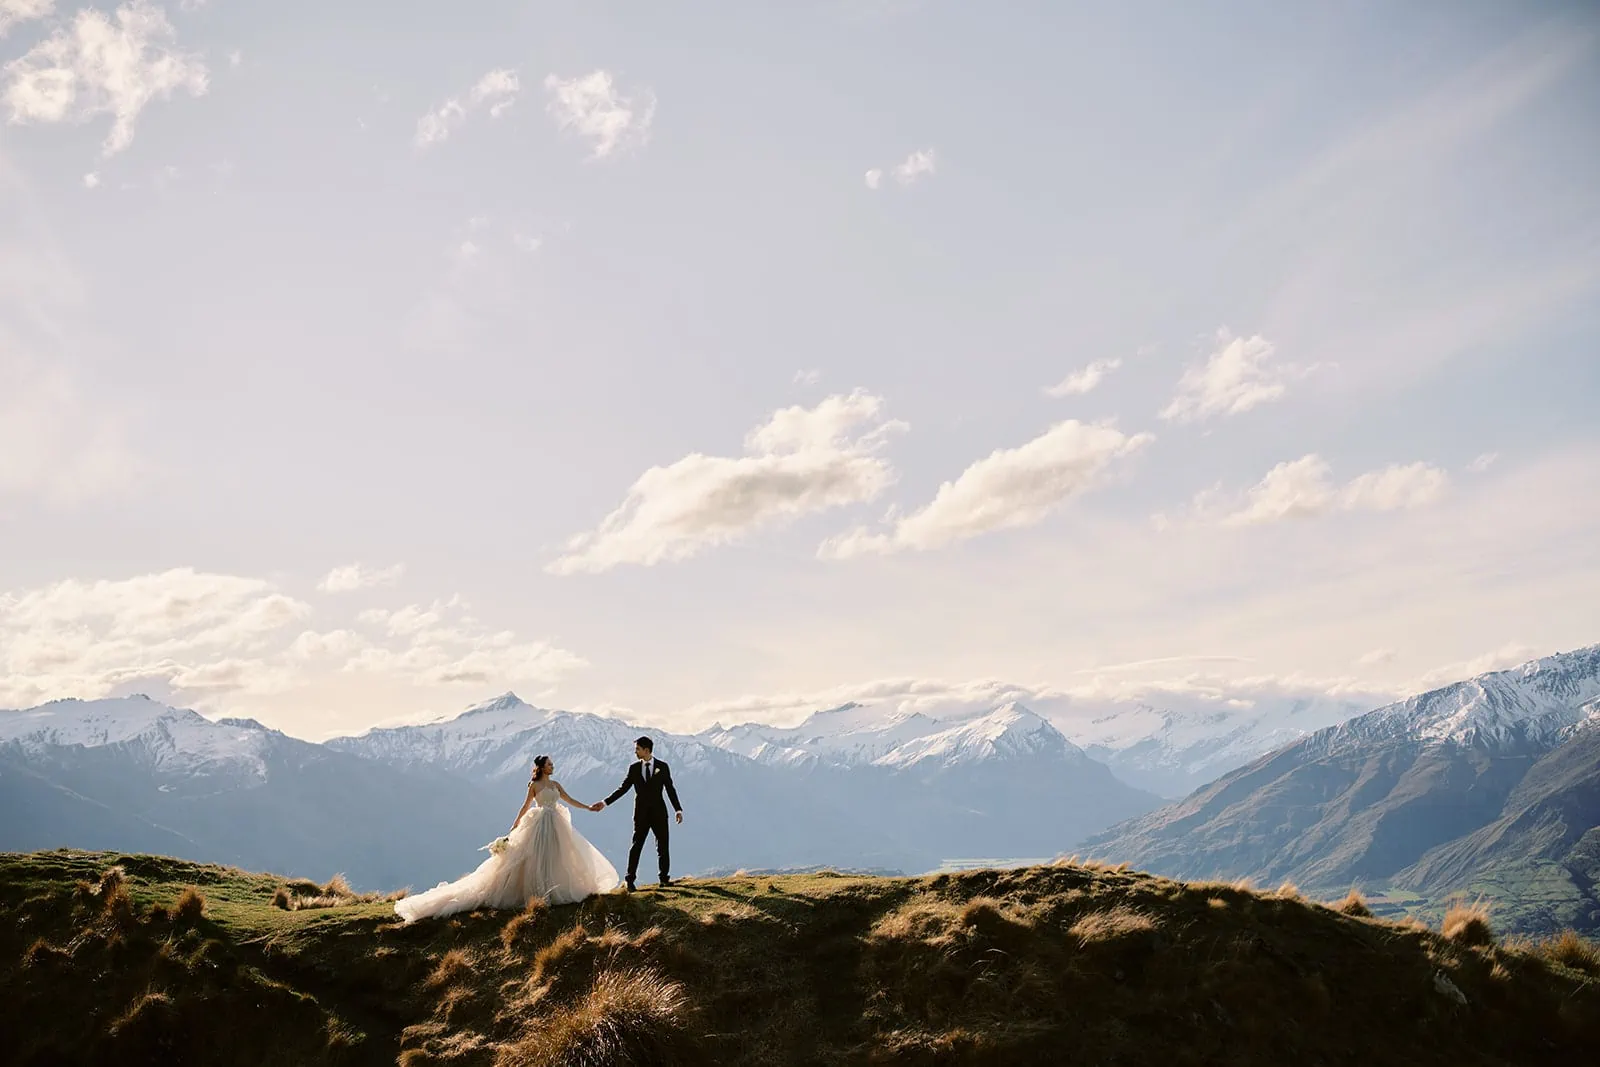 Queenstown New Zealand Elopement Wedding Photographer - A bride and groom standing on top of a hill with mountains in the background, showcasing the breathtaking scenery offered by the Queenstown heli-wedding package.